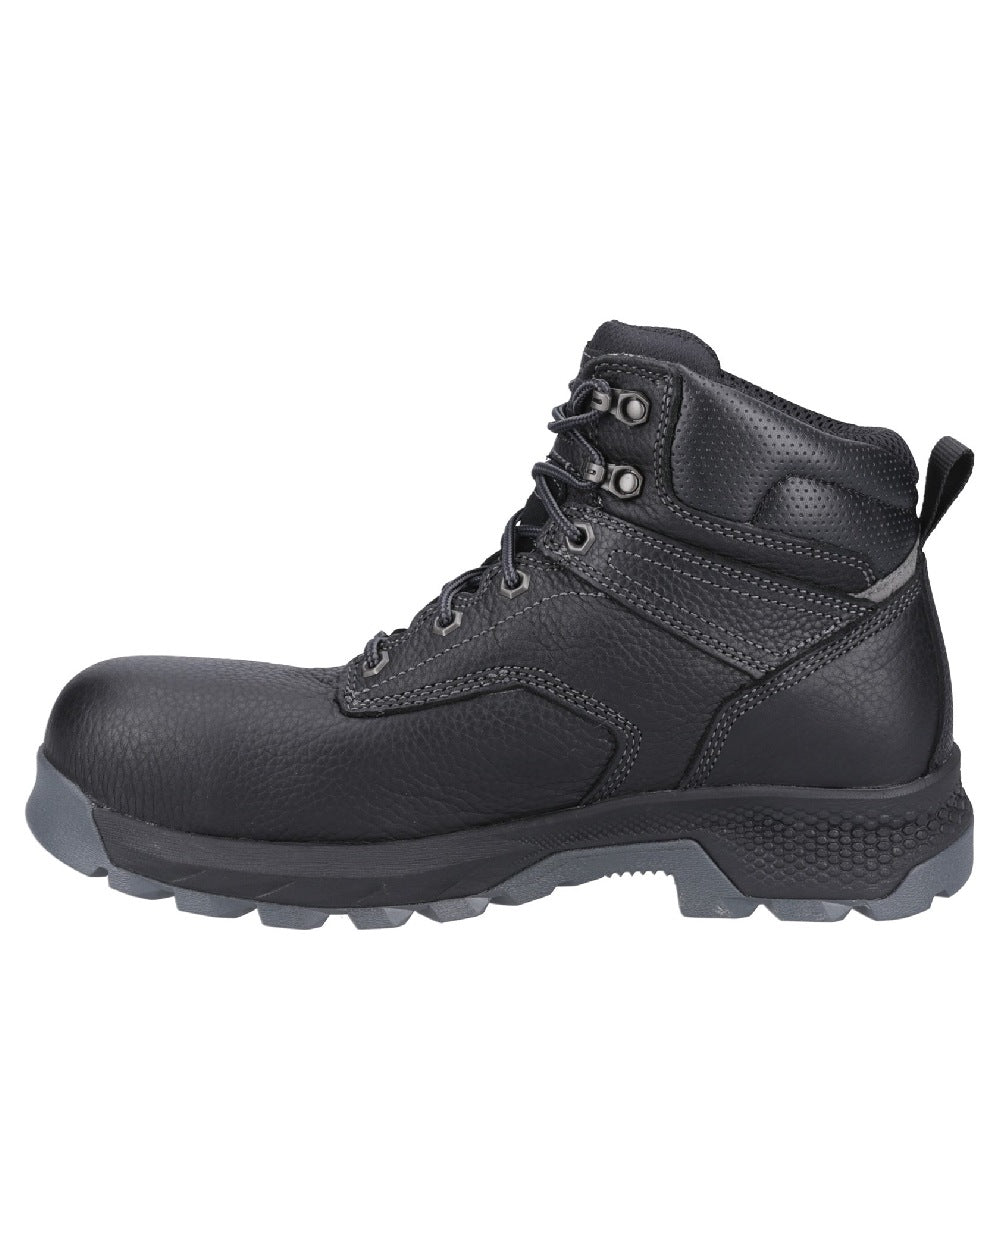 Black coloured Timberland Pro Titan 6inch Safety Boots on white background 